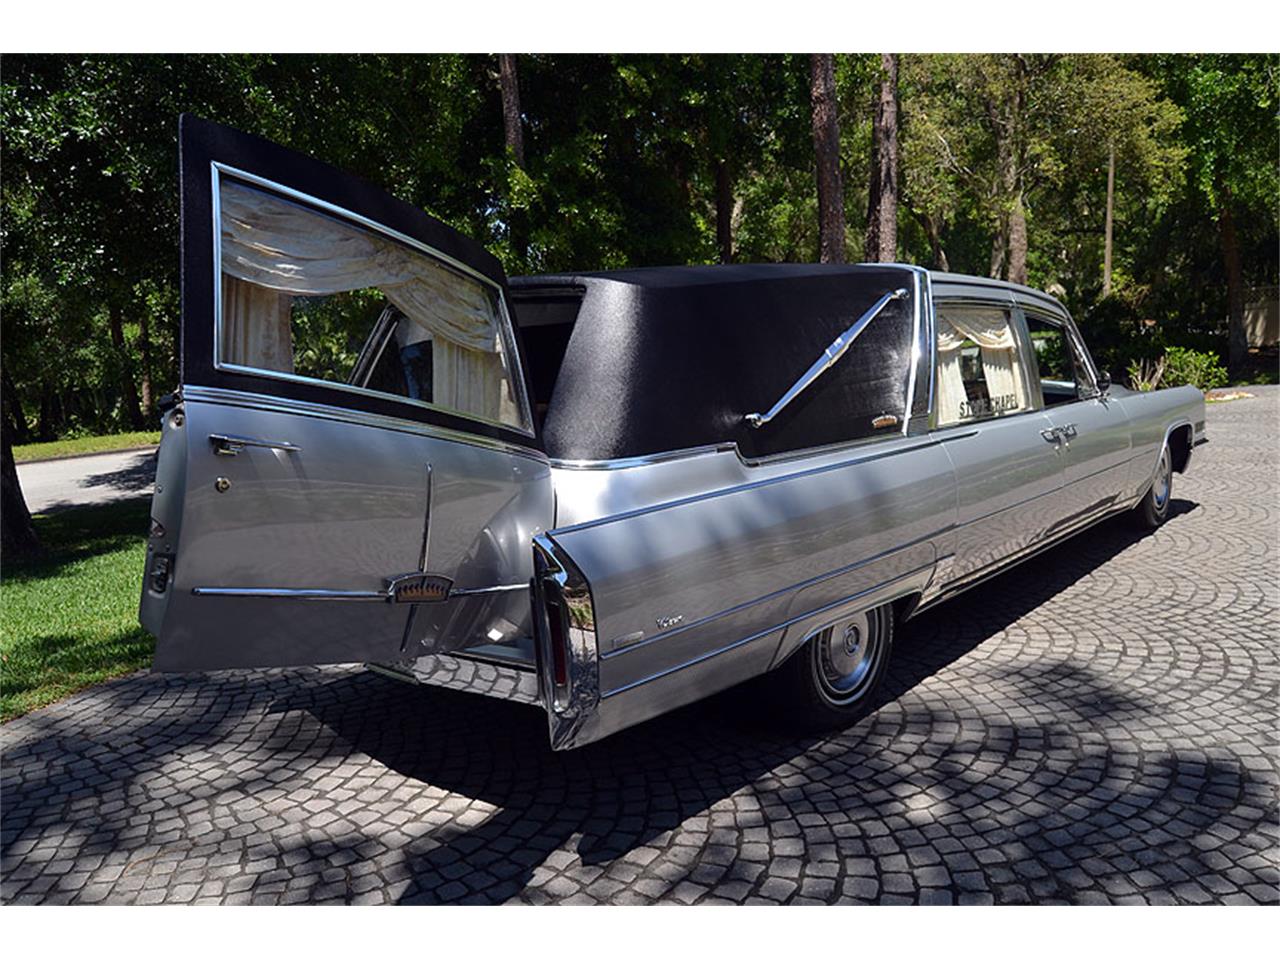 1966 Cadillac Crown Sovereign Funeral Coach for sale in Mt. Dora, FL – photo 29